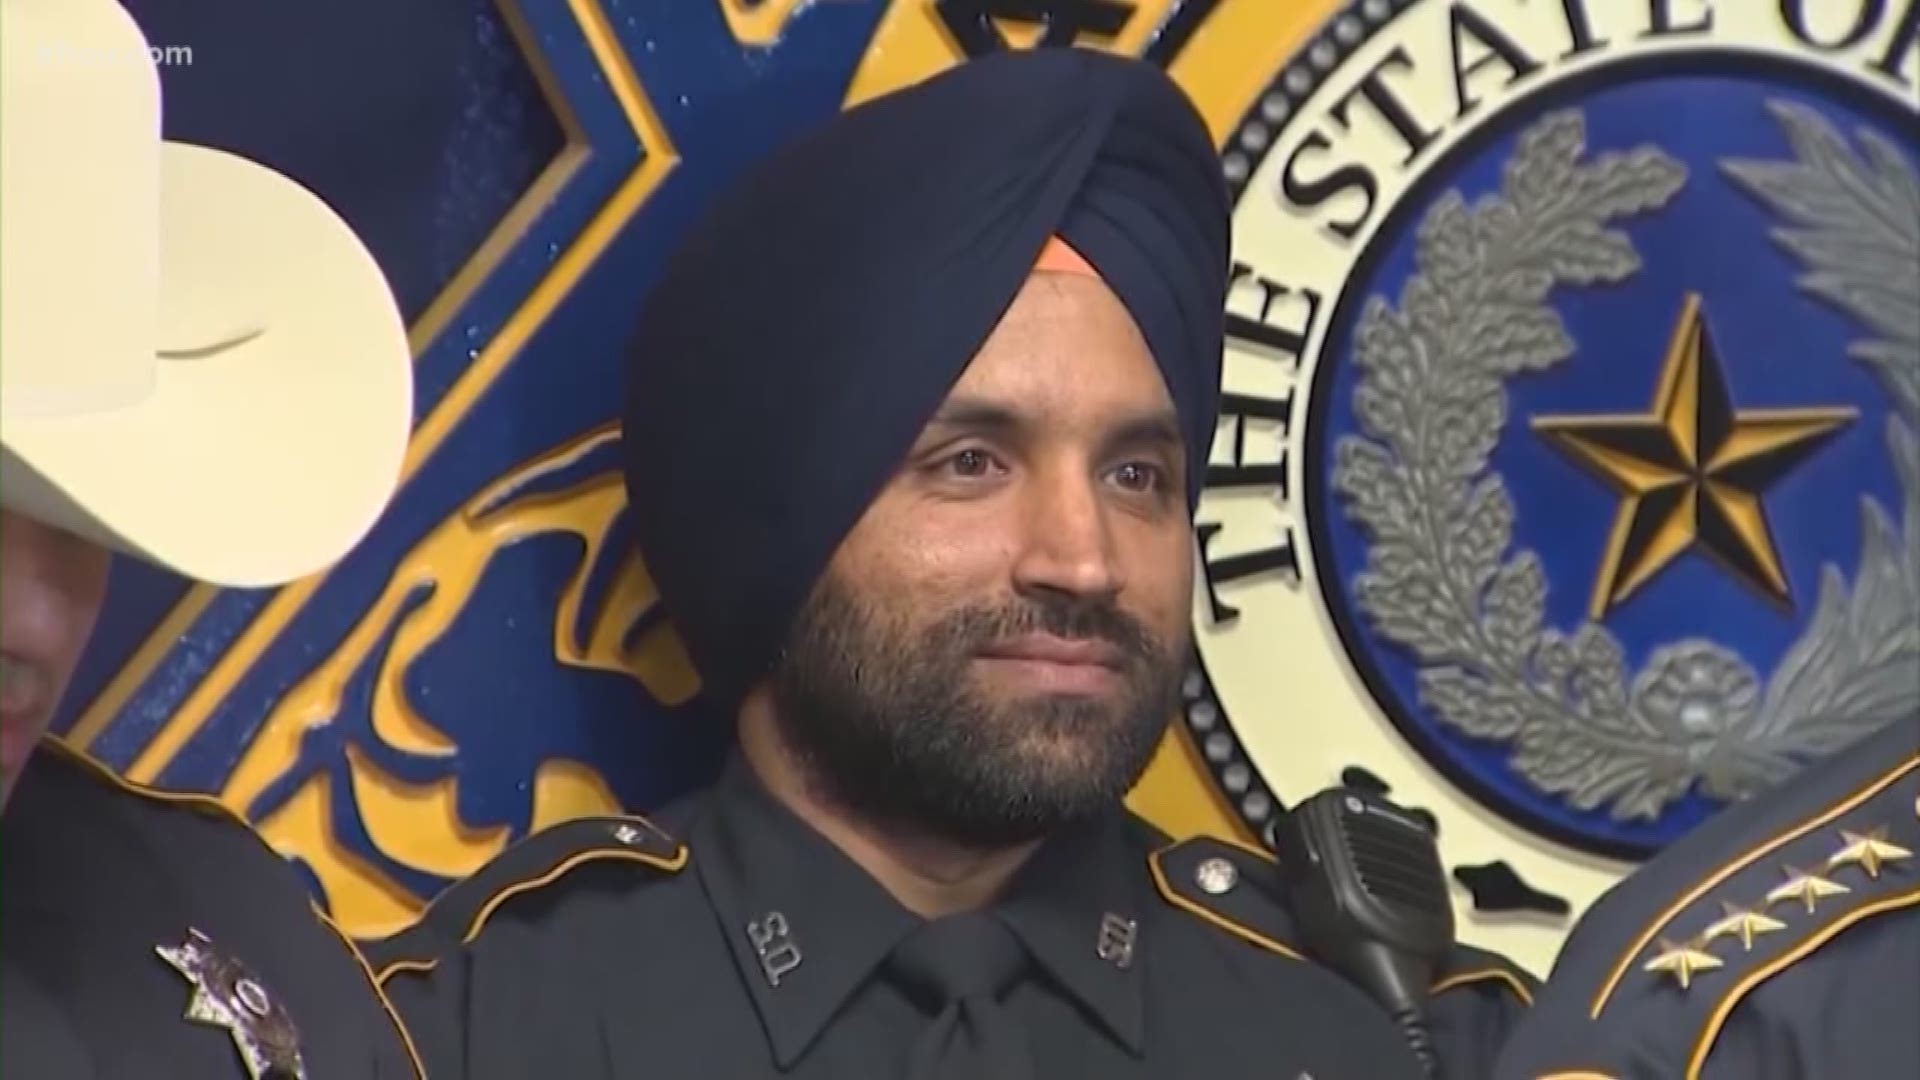 The Houston Police Department is now the largest law enforcement agency in Texas to allow Sikh officers to represent their faith while on duty.